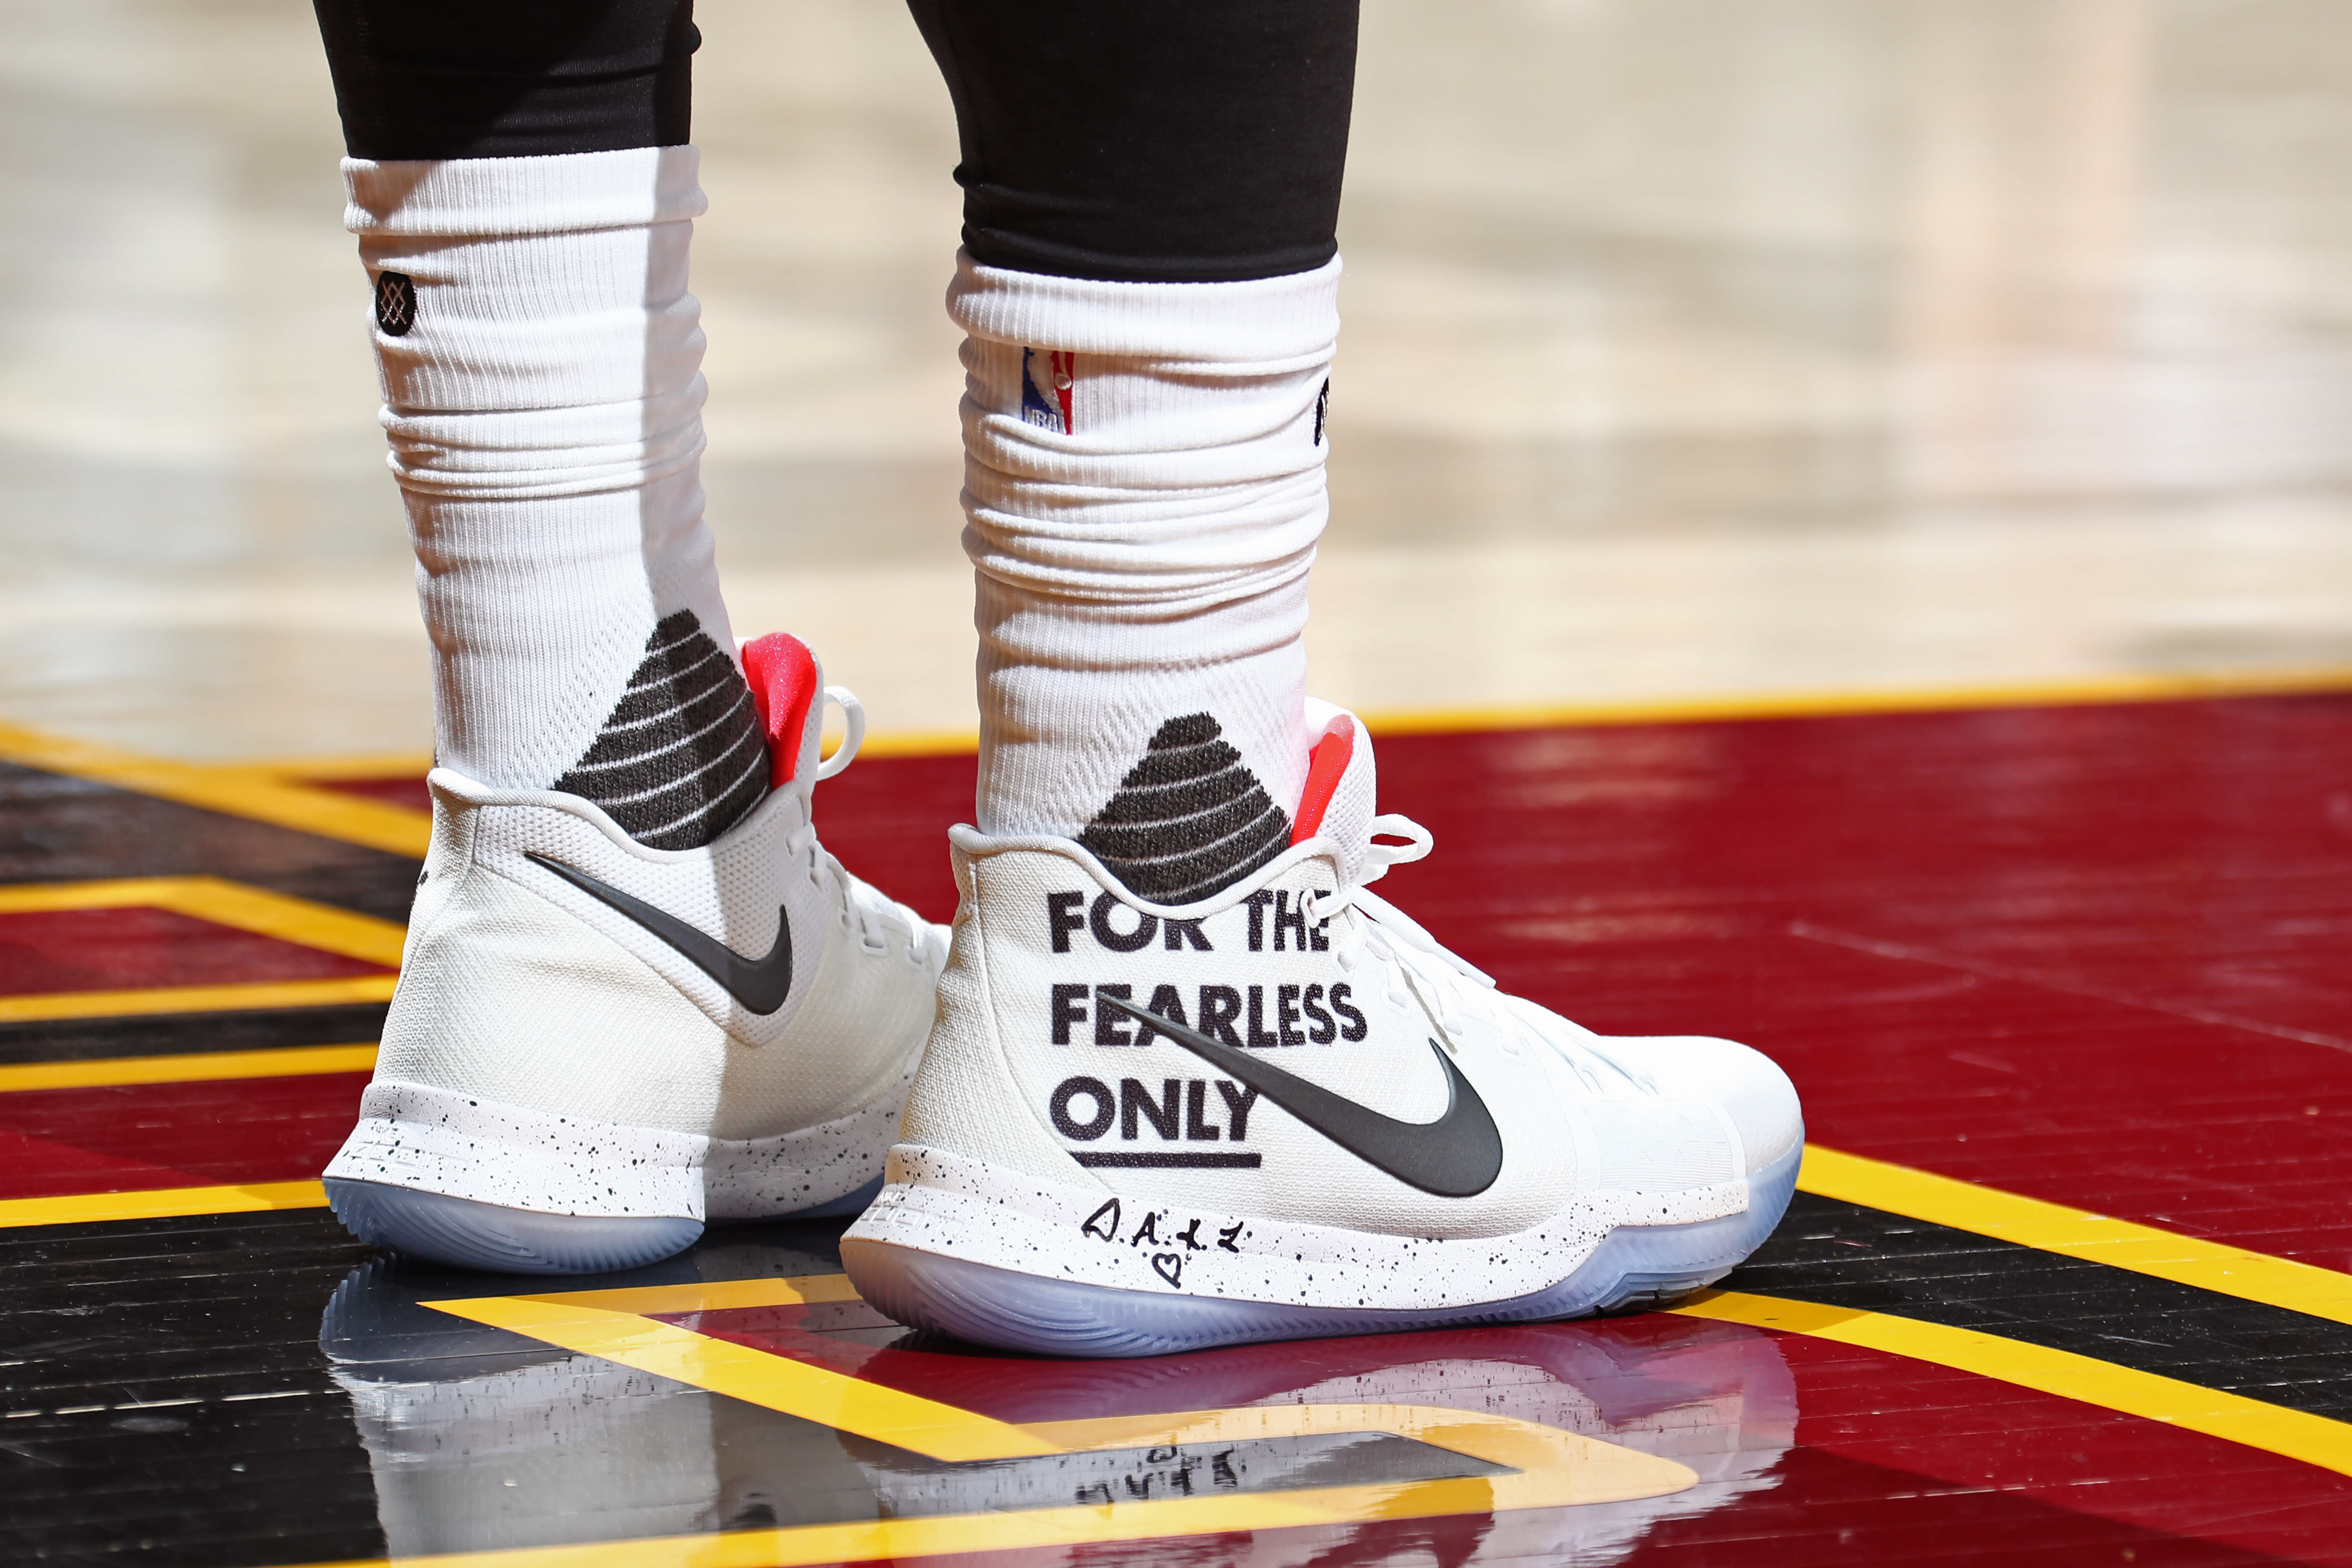 kyrie fearless shoes